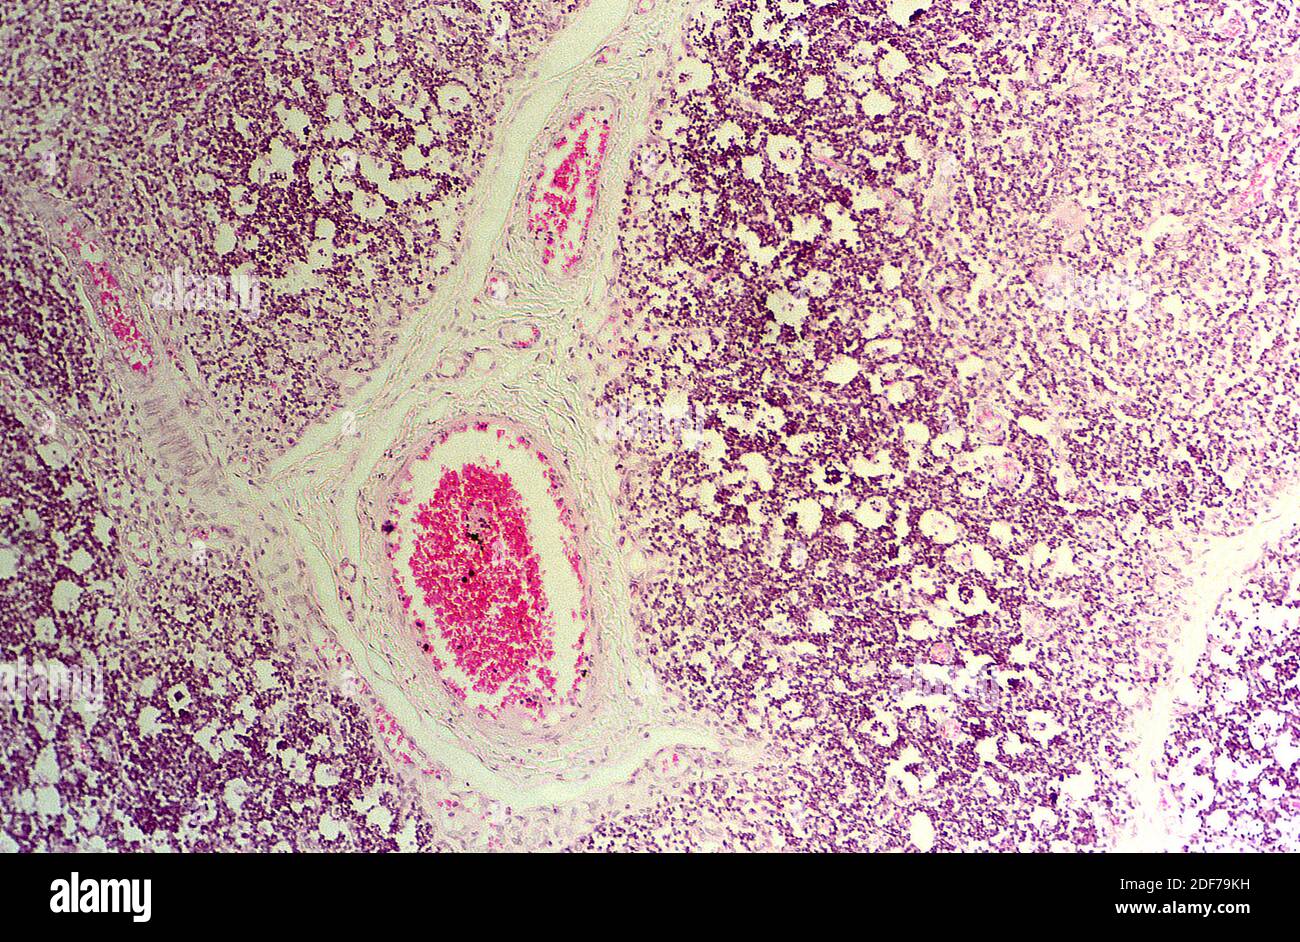 Thymus is a lymphoid organ of the immune system. Photomicrograph. Stock Photo